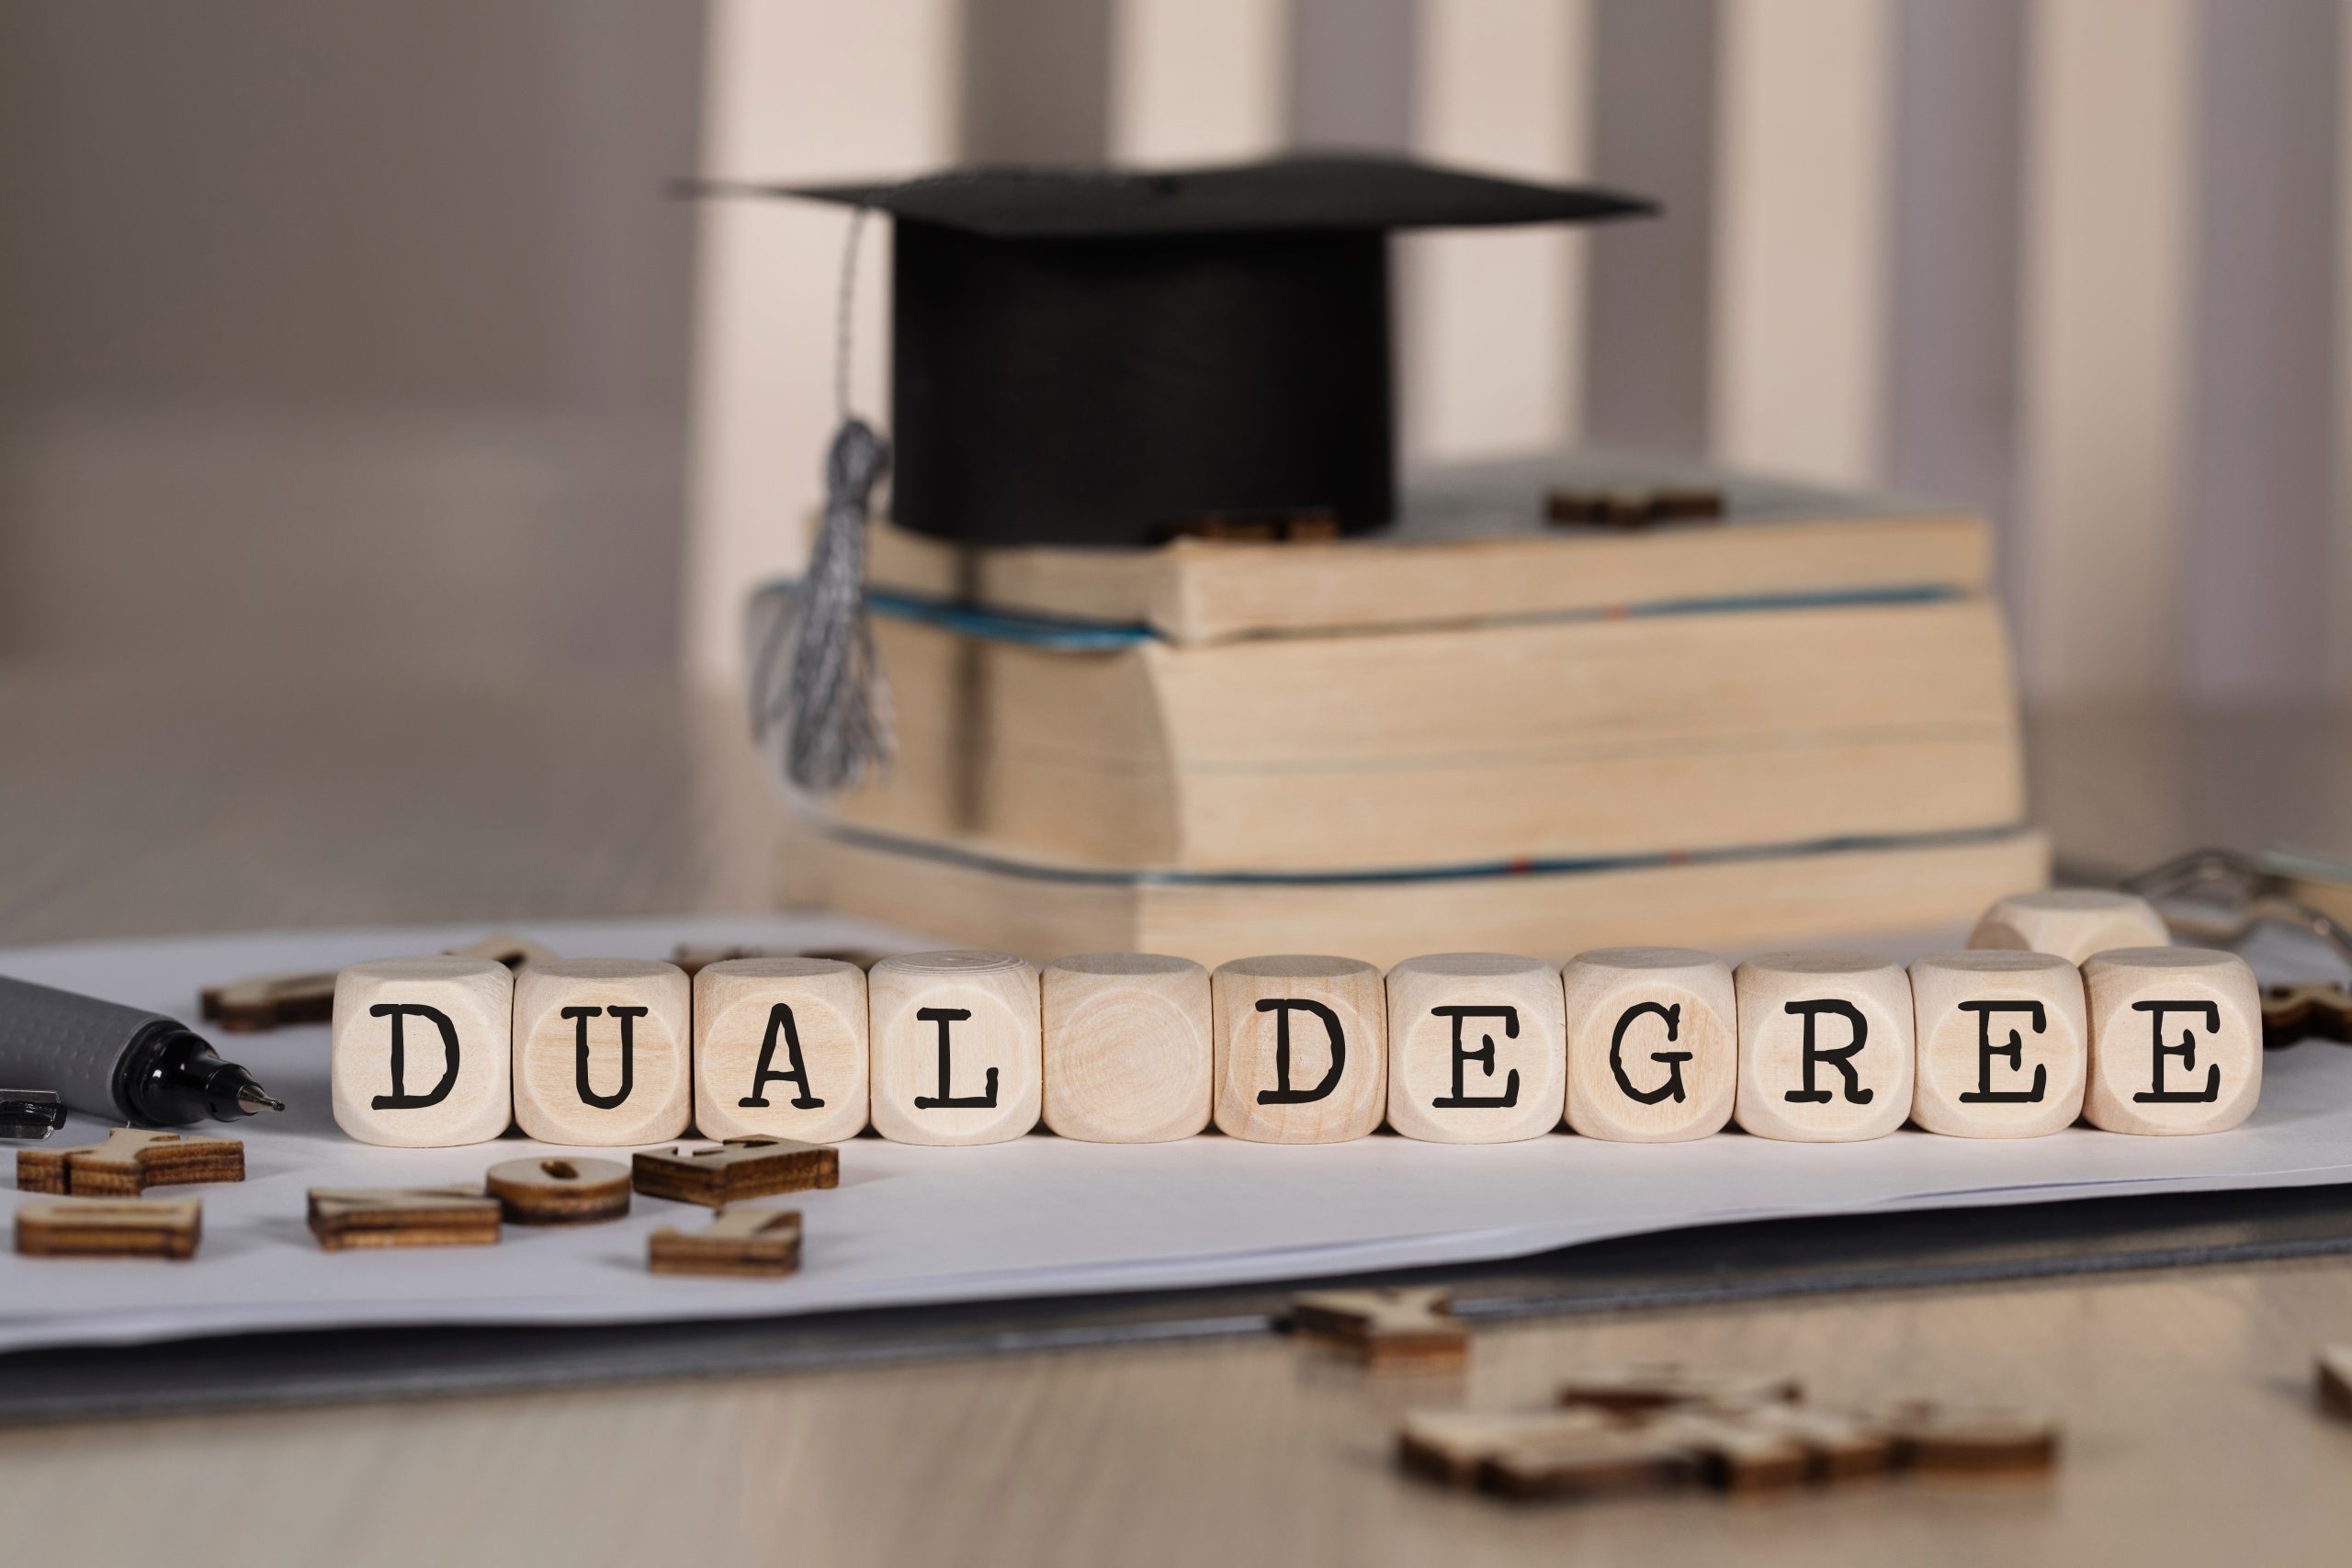 Image of dual degree sign for our FAQ on What is the Difference Between a Dual Degree Program and a Major and Minor Program